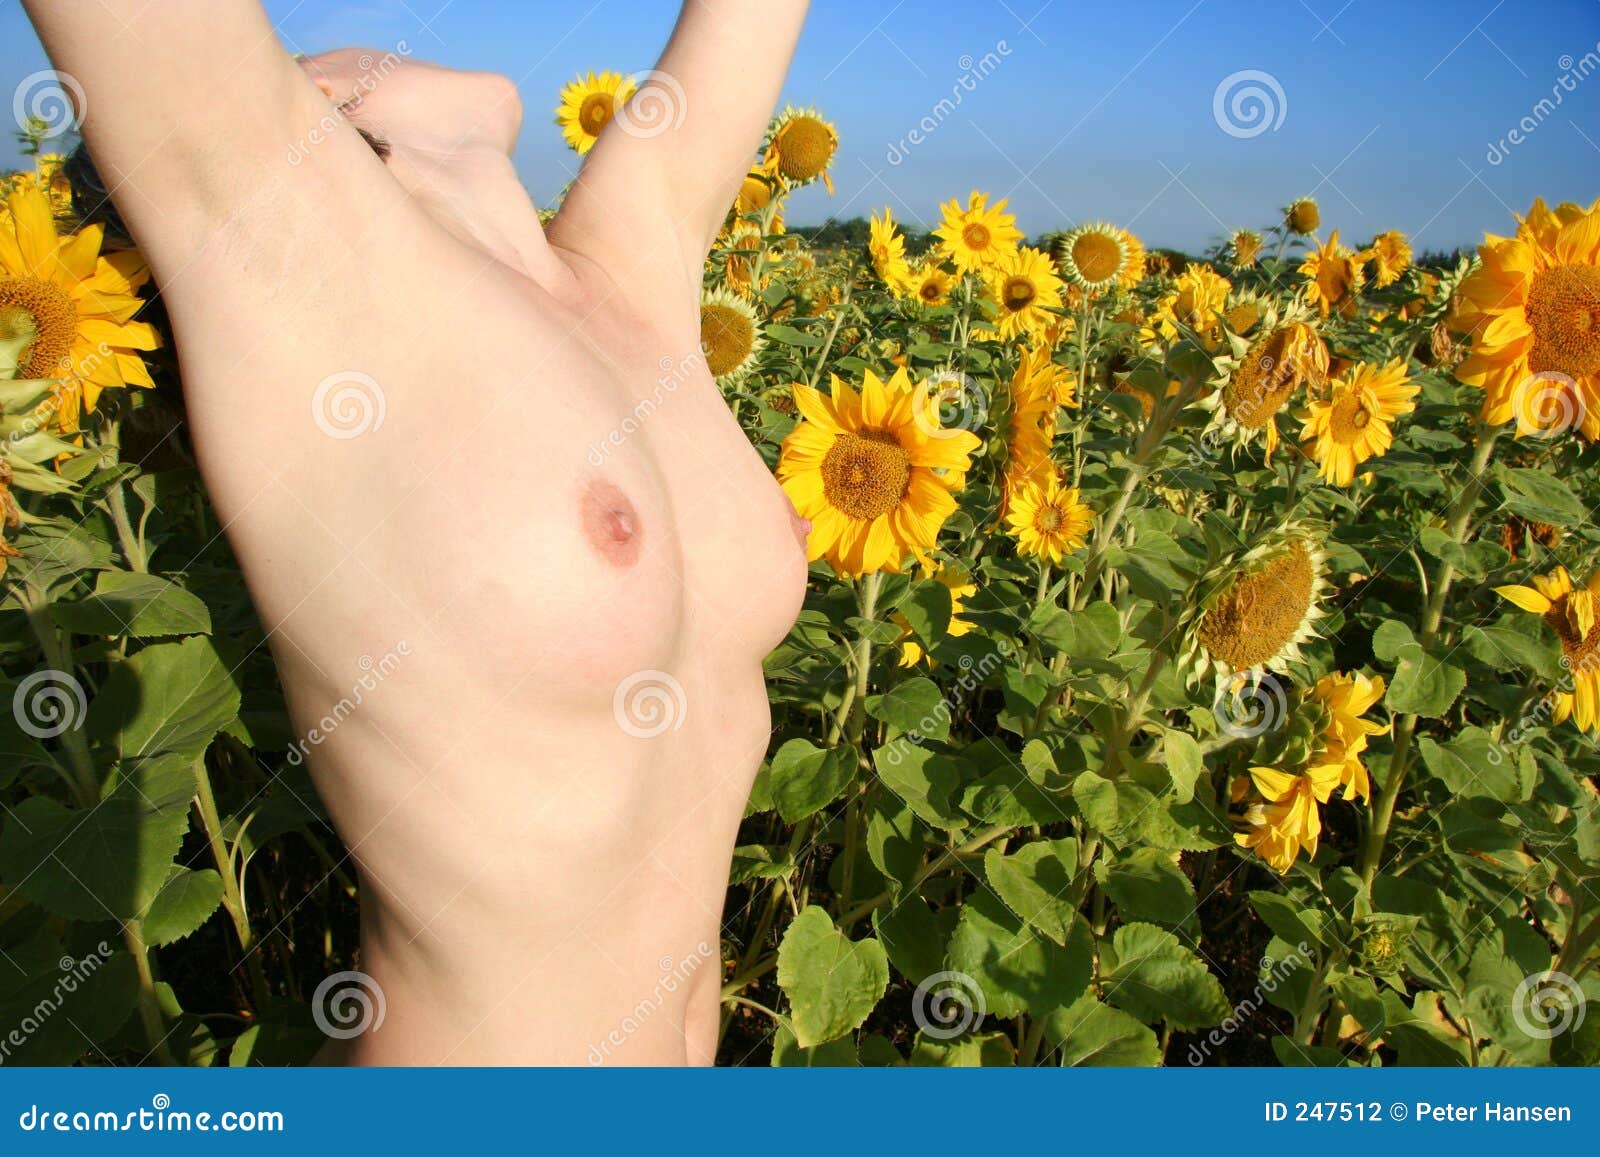 Nude In Sunflower Field Arms Up Stock Photo Image